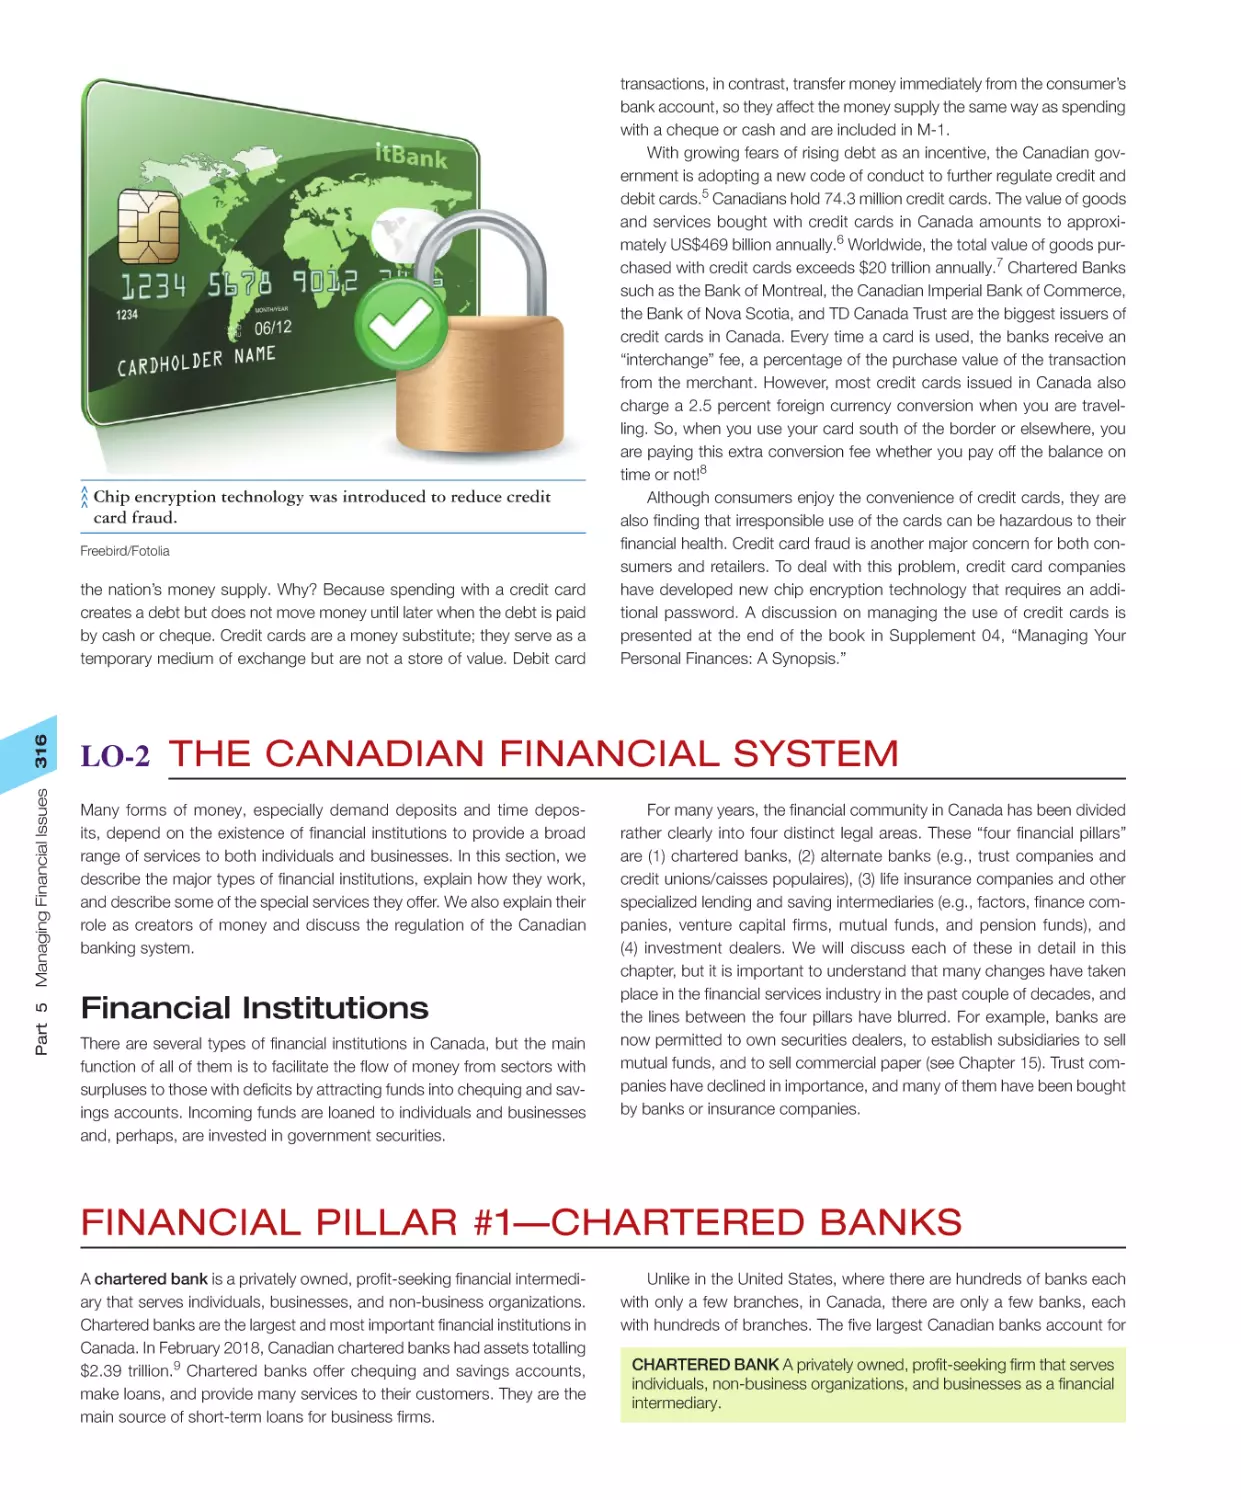 LO‐2 The Canadian Financial System
Financial Pillar #1—Chartered Banks